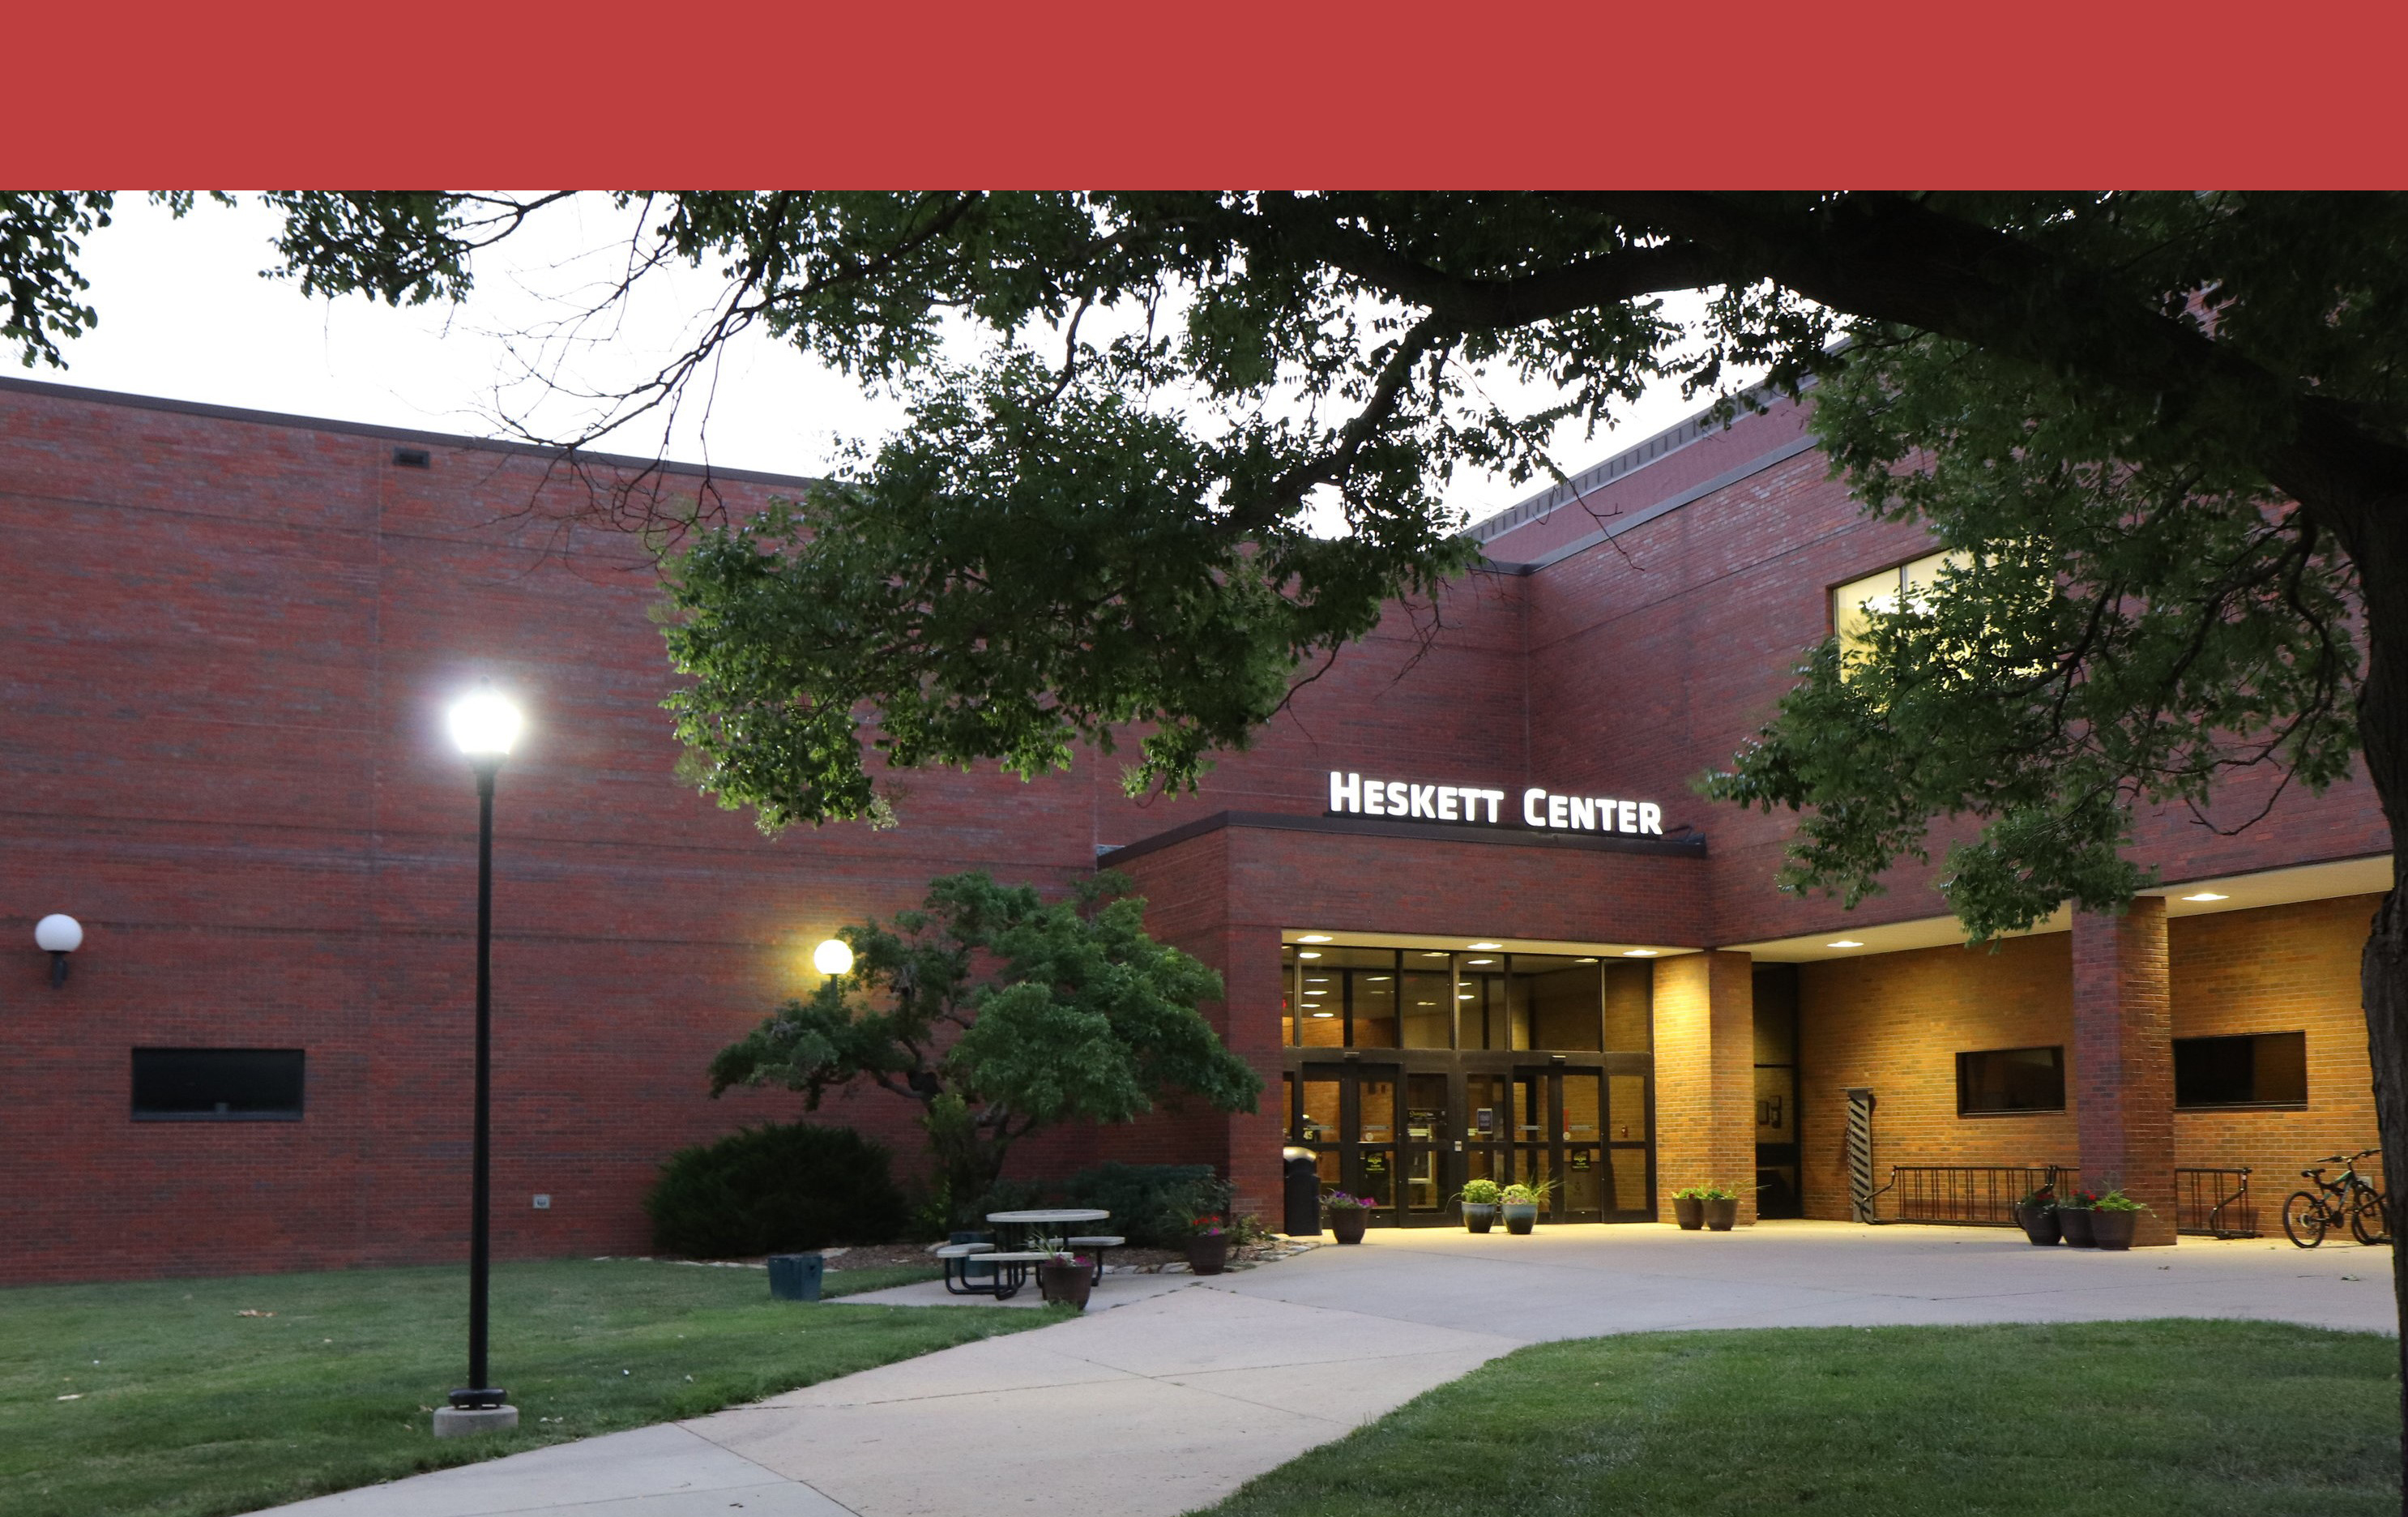 View of the Heskett Center from the outside. The sign above the door is lit up, as is the lamp post in the left of the image.